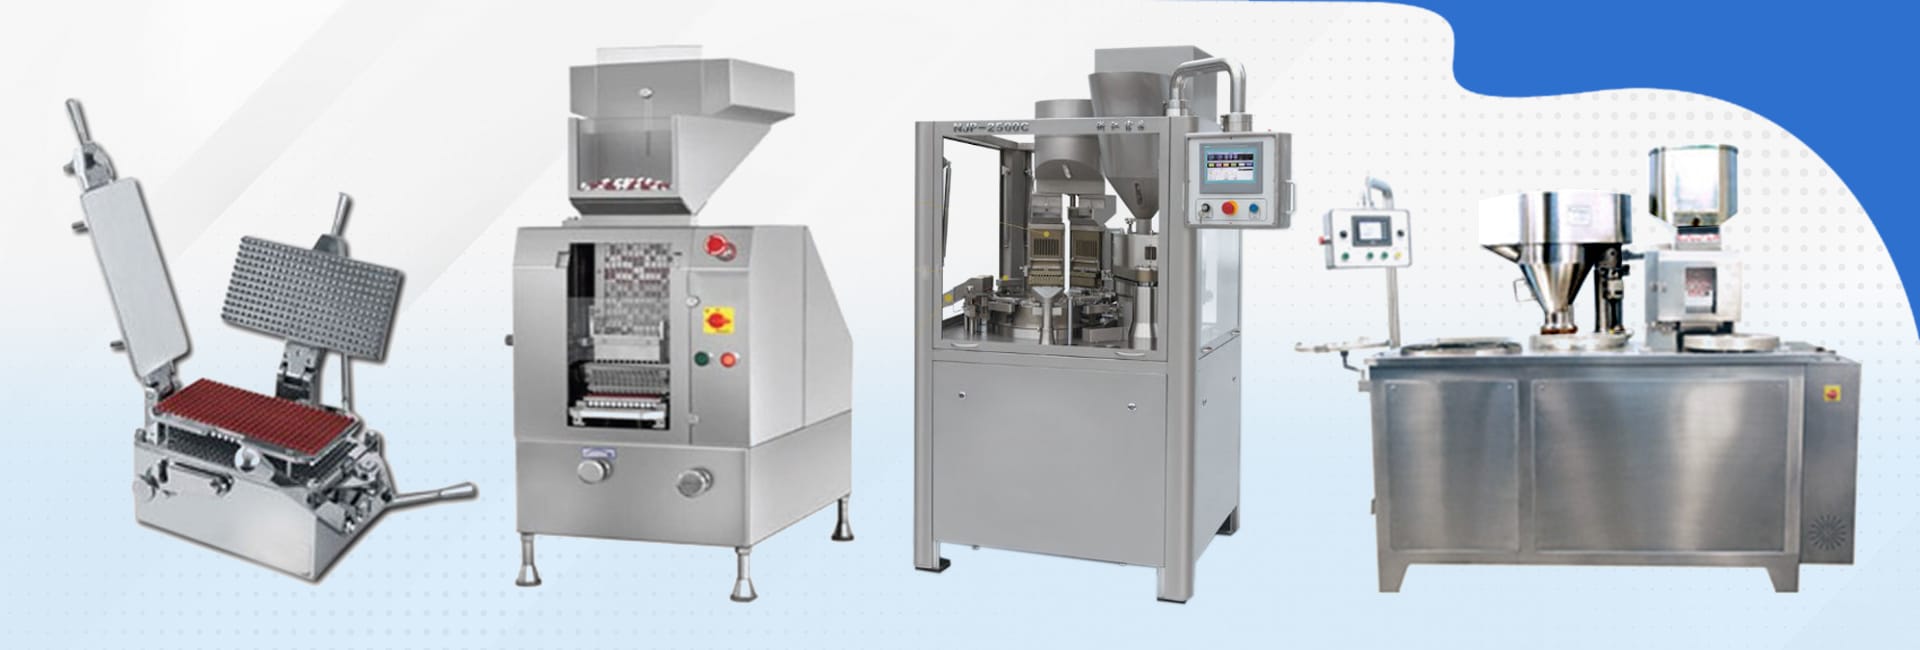 Automatic Capsule Filling Machine Manufacturer and Supplier in India